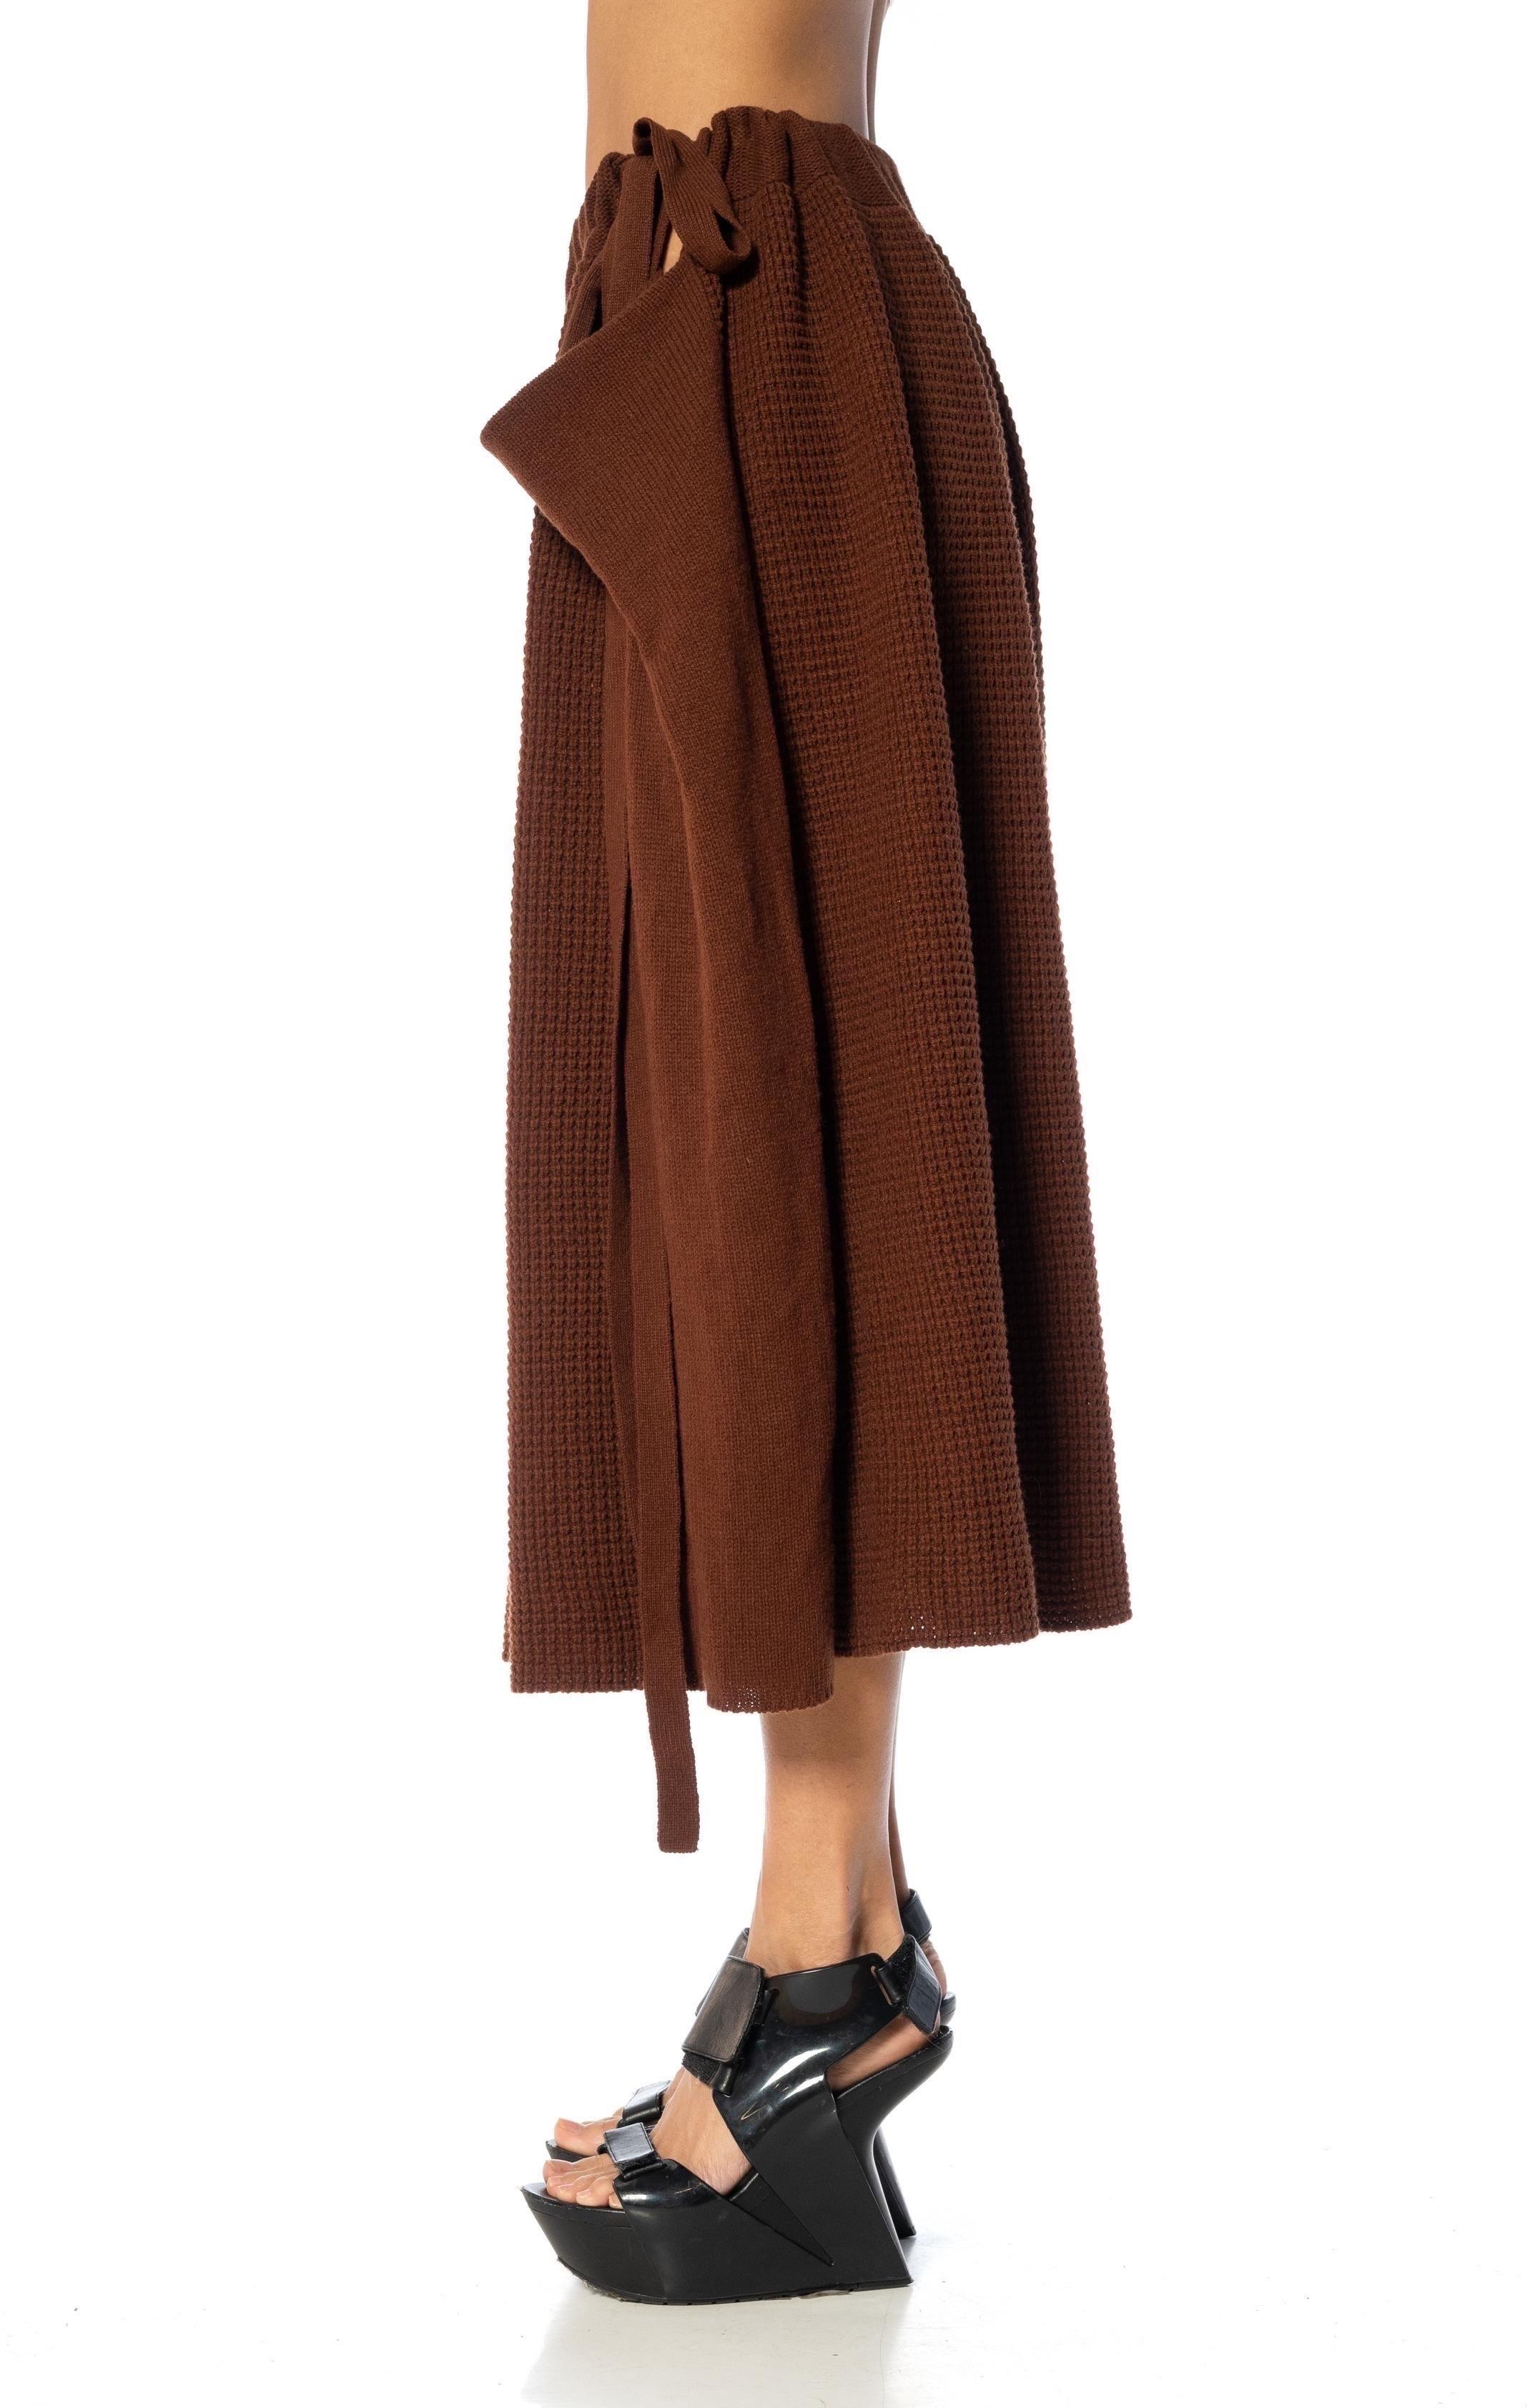 1980S Y’S YOHJI YAMAMOTO Brown Wool & Nylon Knit Drawstring Skirt In Excellent Condition For Sale In New York, NY